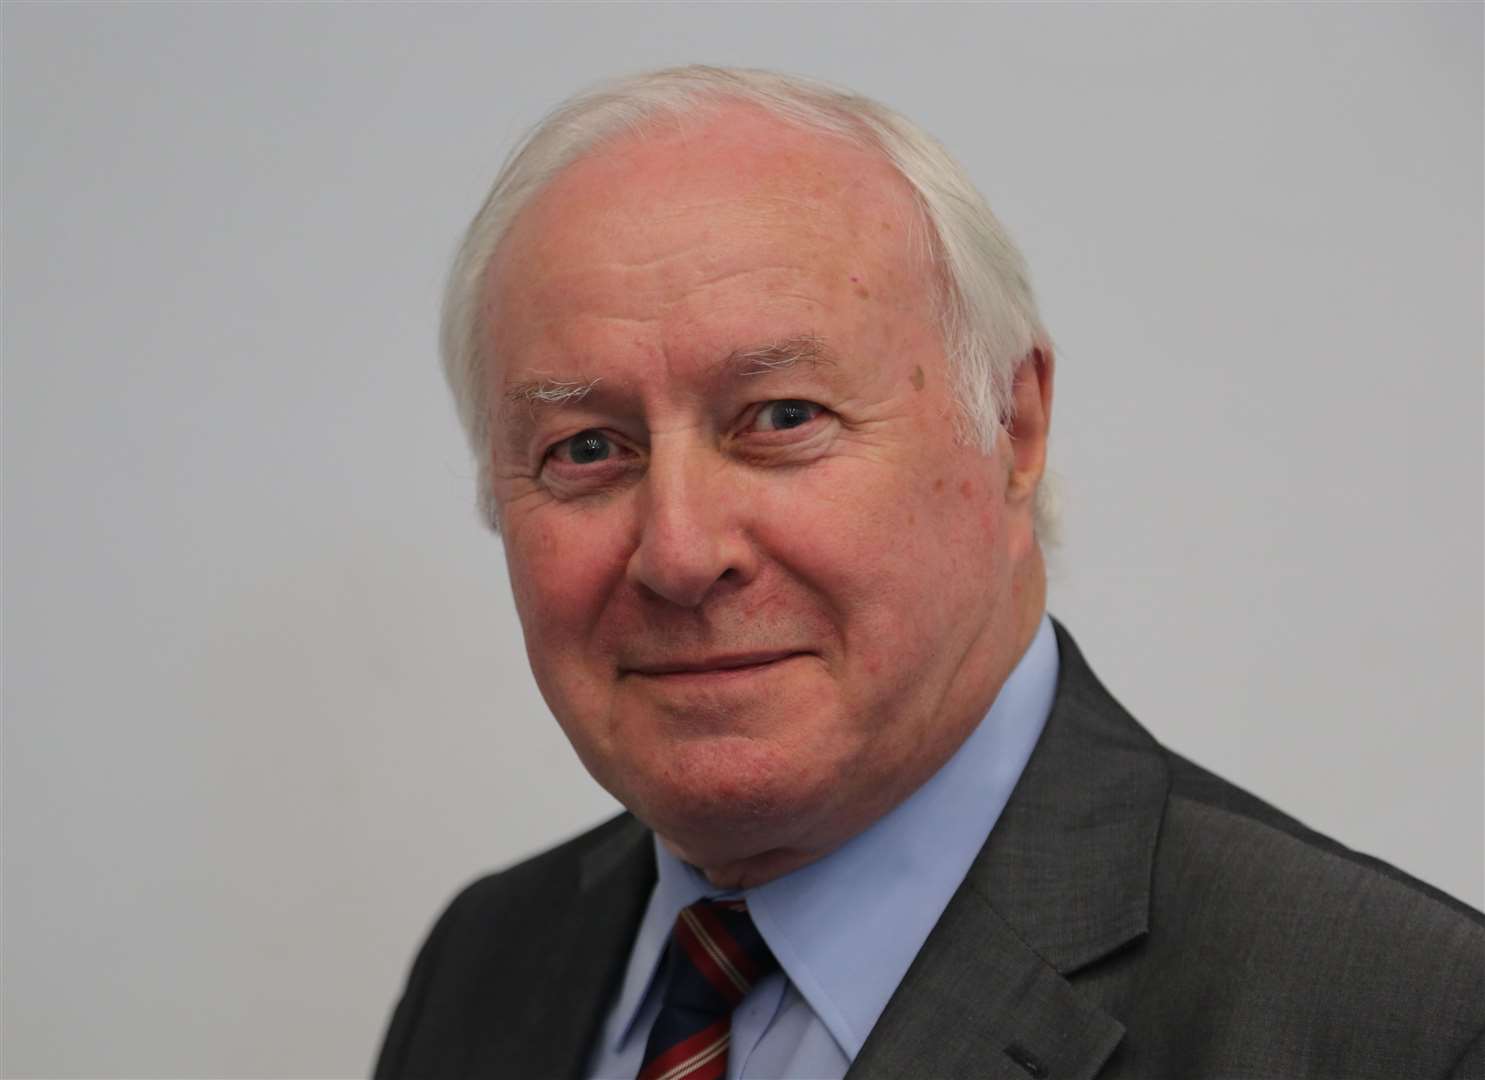 Folkestone and Hythe District Council leader Cllr David Monk